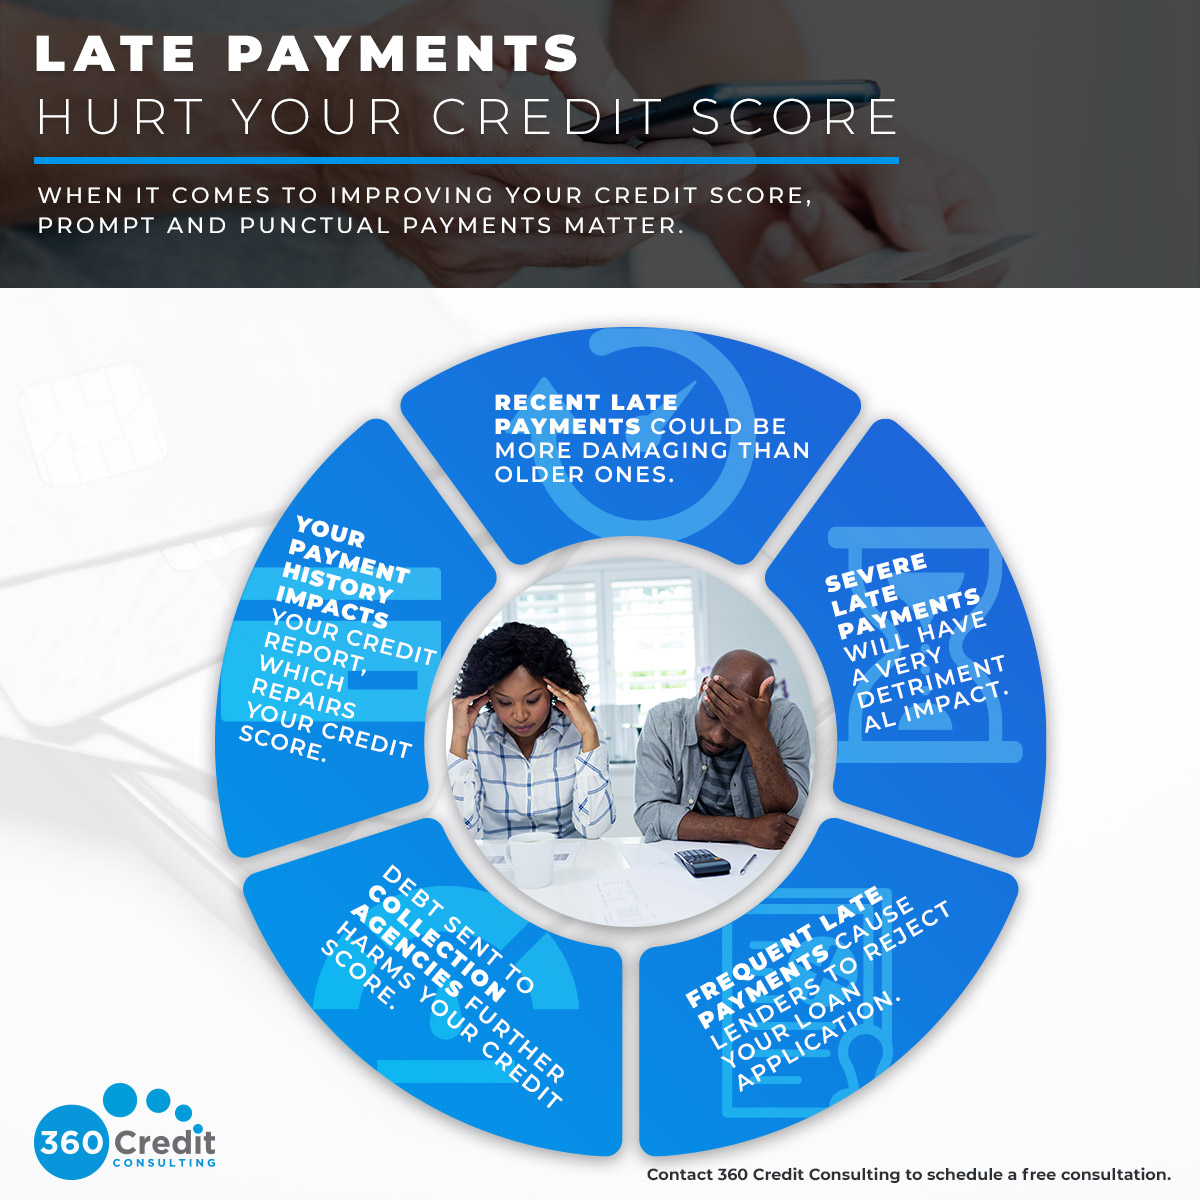 Late-Payments-Infographic-60d4ff95daf52